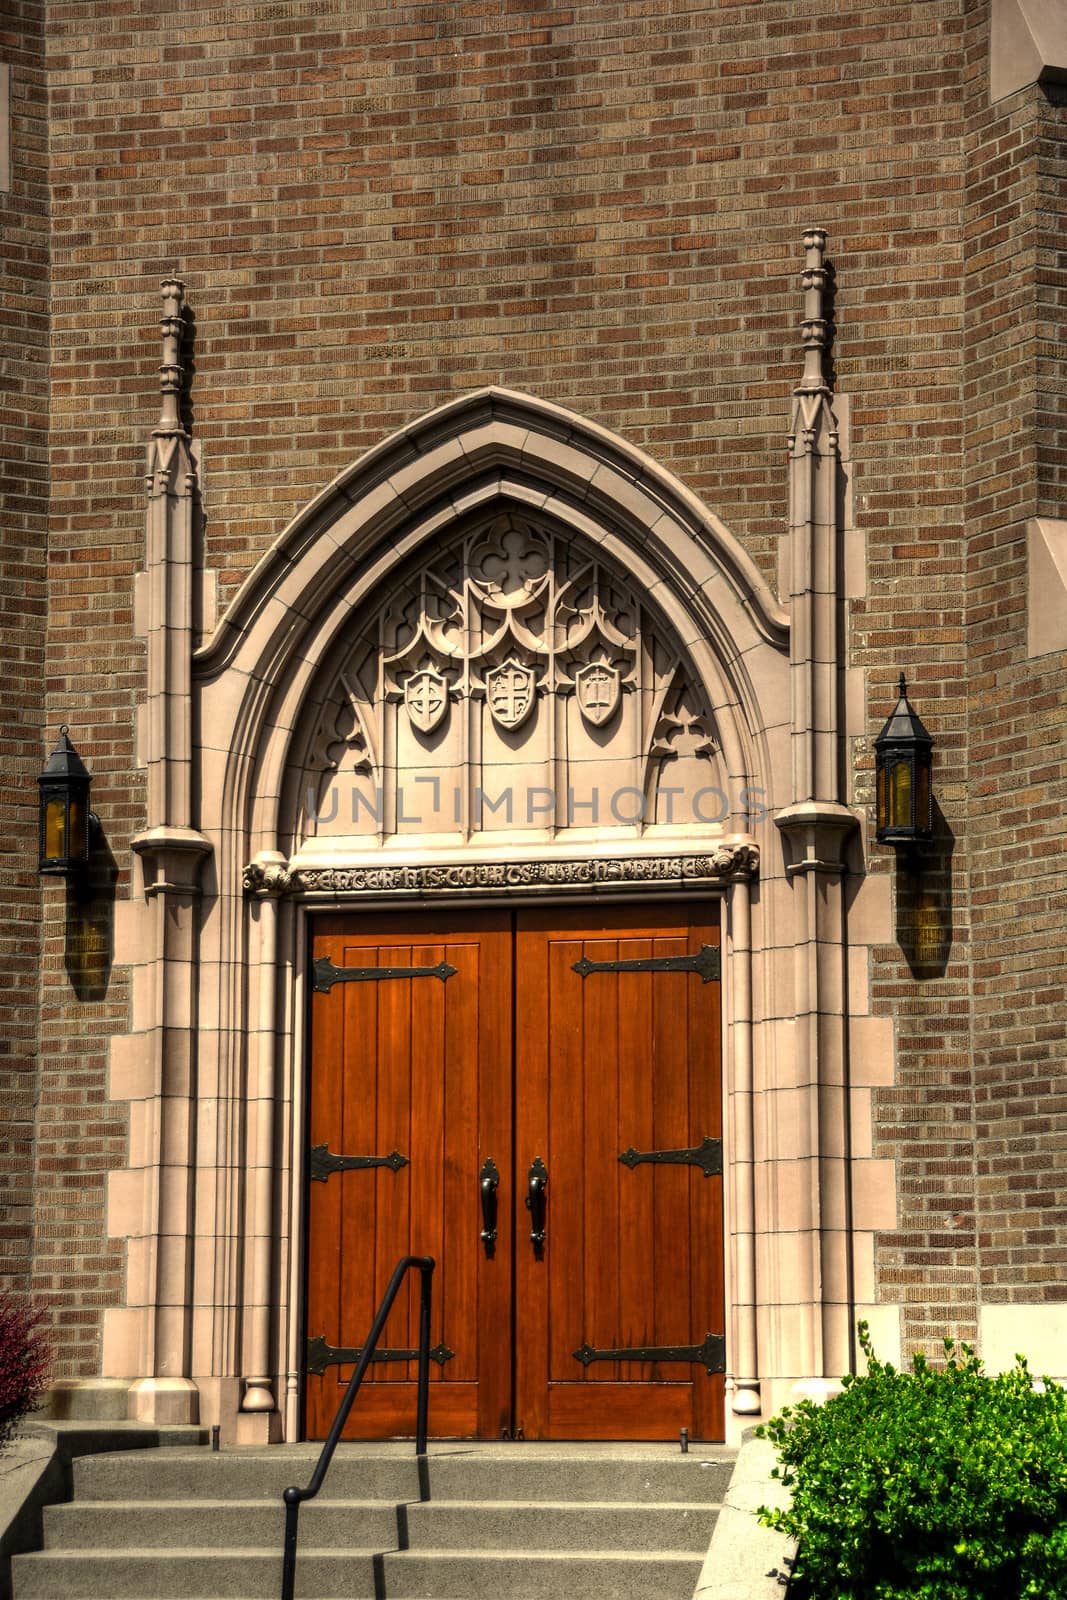 Gothic Church in Bellingham, WA showing details of ornate front door and steps